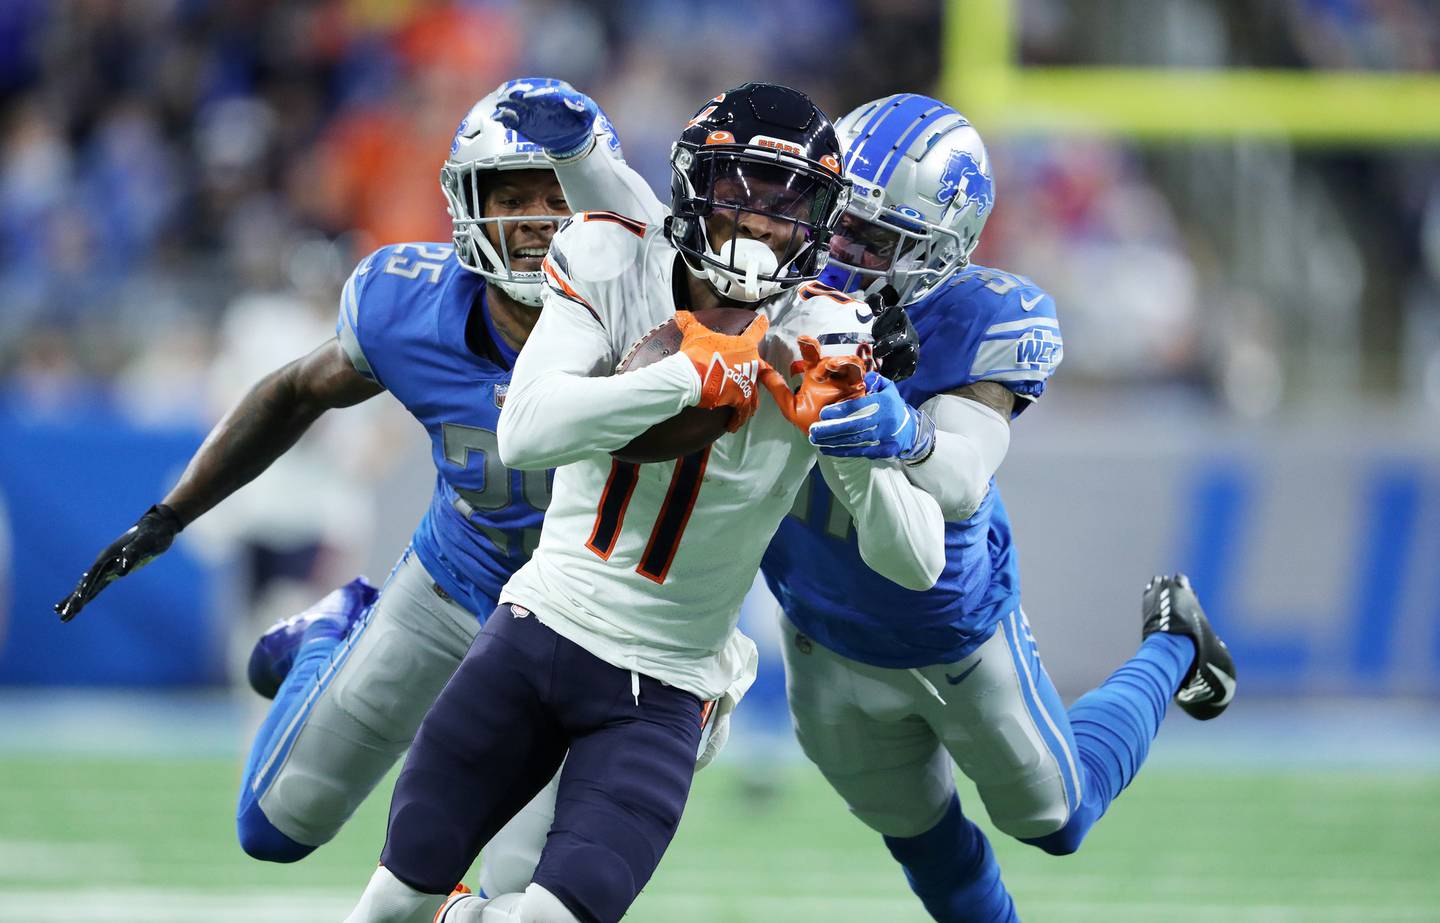 Bears wide receiver Darnell Mooney (11) makes a 52-yard reception as Lions safety Will Harris (25) and safety Dean Marlowe defend in the second quarter on Nov. 25, 2021, at Ford Field in Detroit.